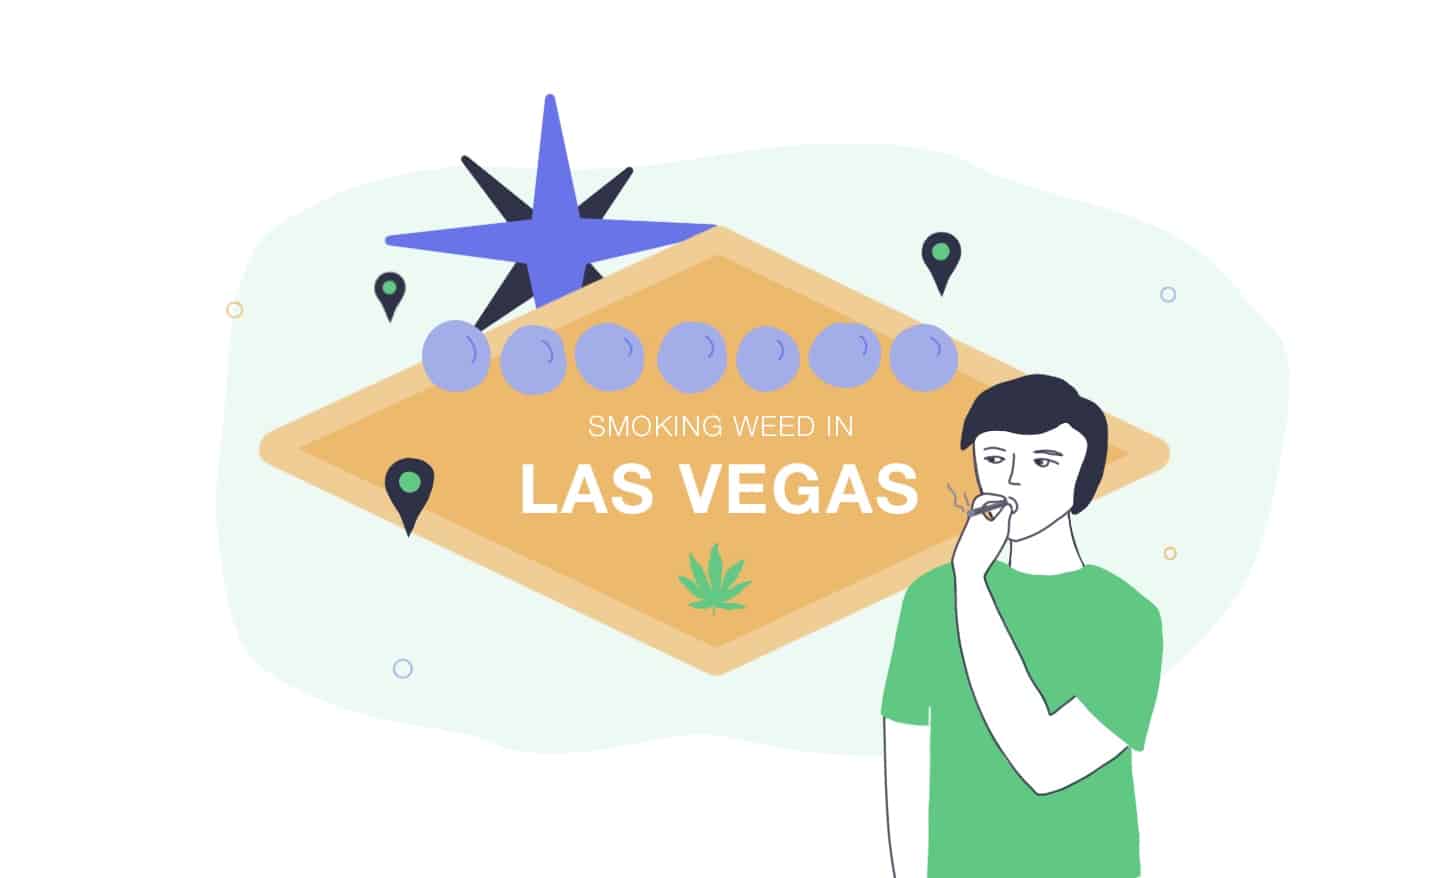 Where Can You Smoke Weed in Las Vegas? - A Visitors' Guide